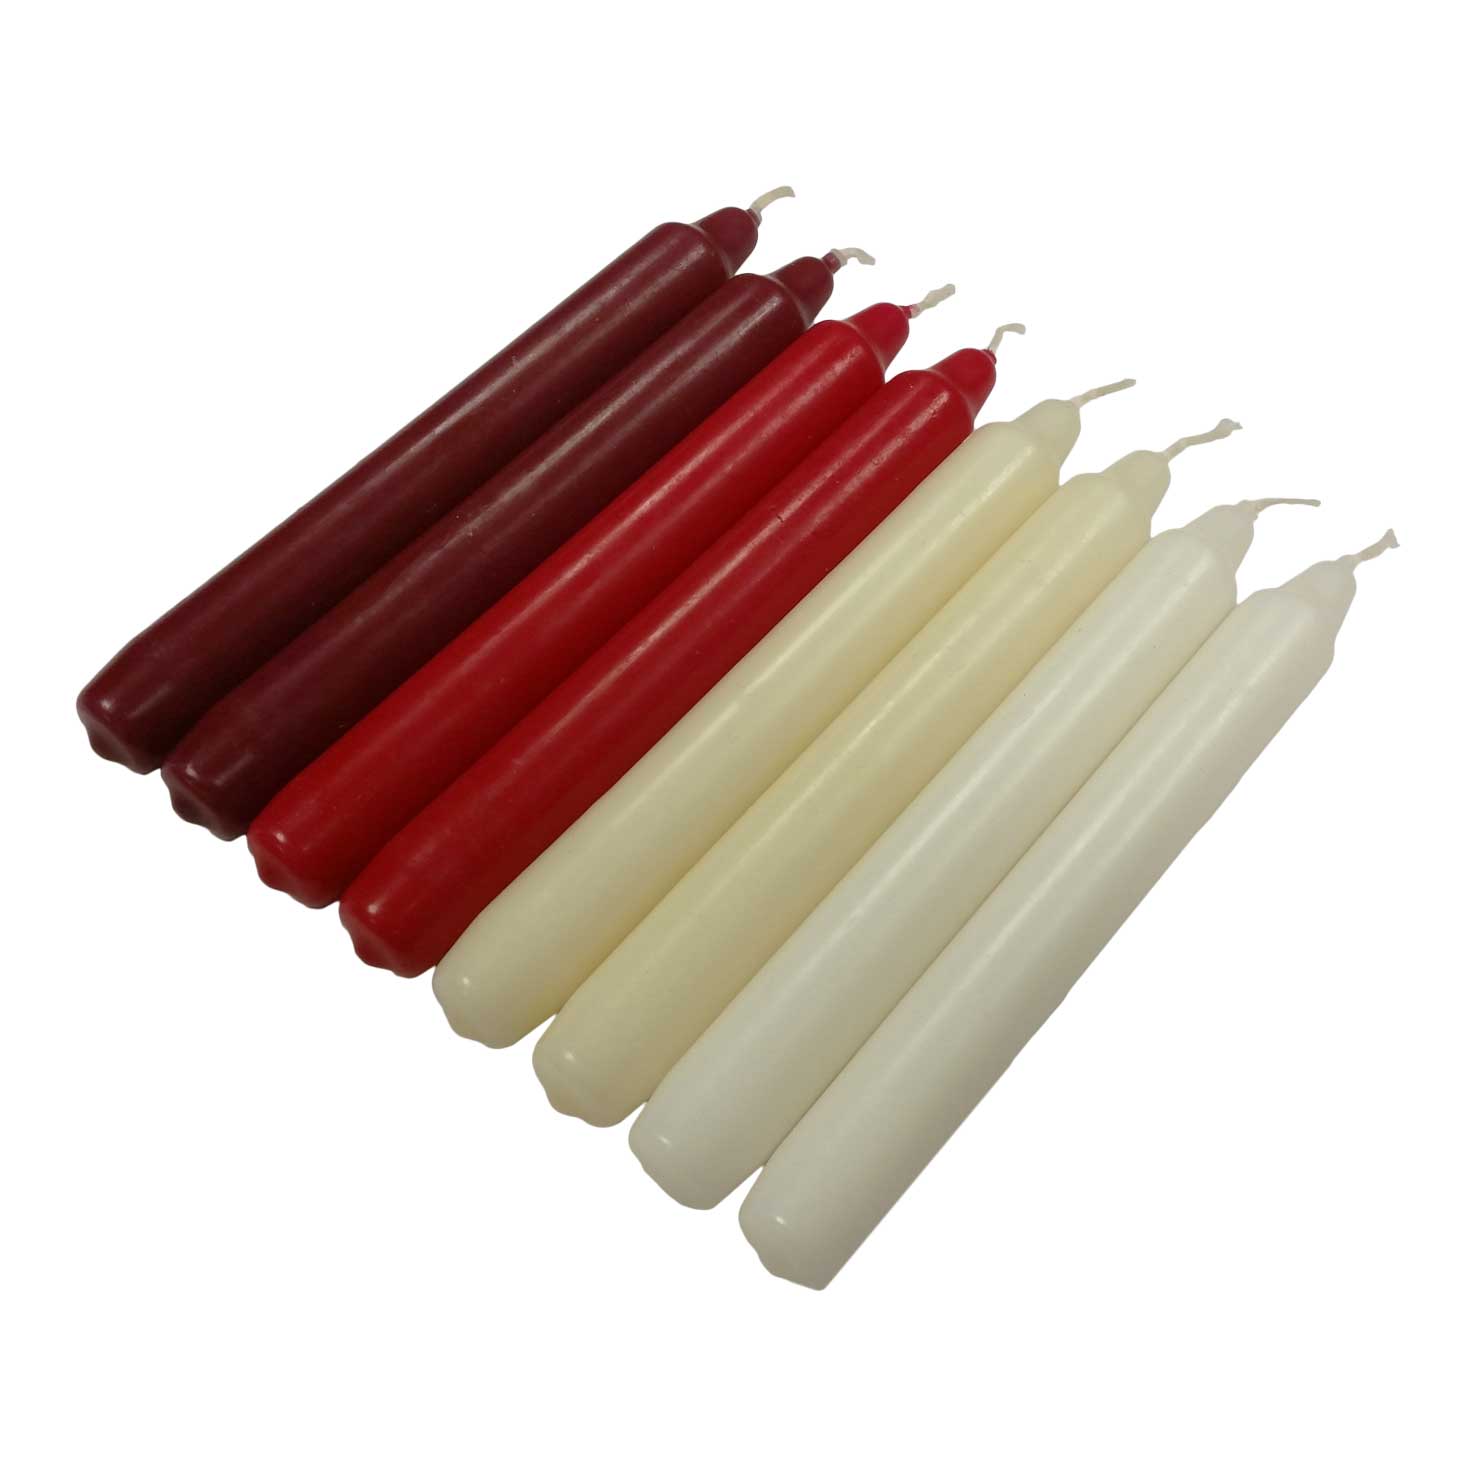 Assorted colour candles - Set of 8